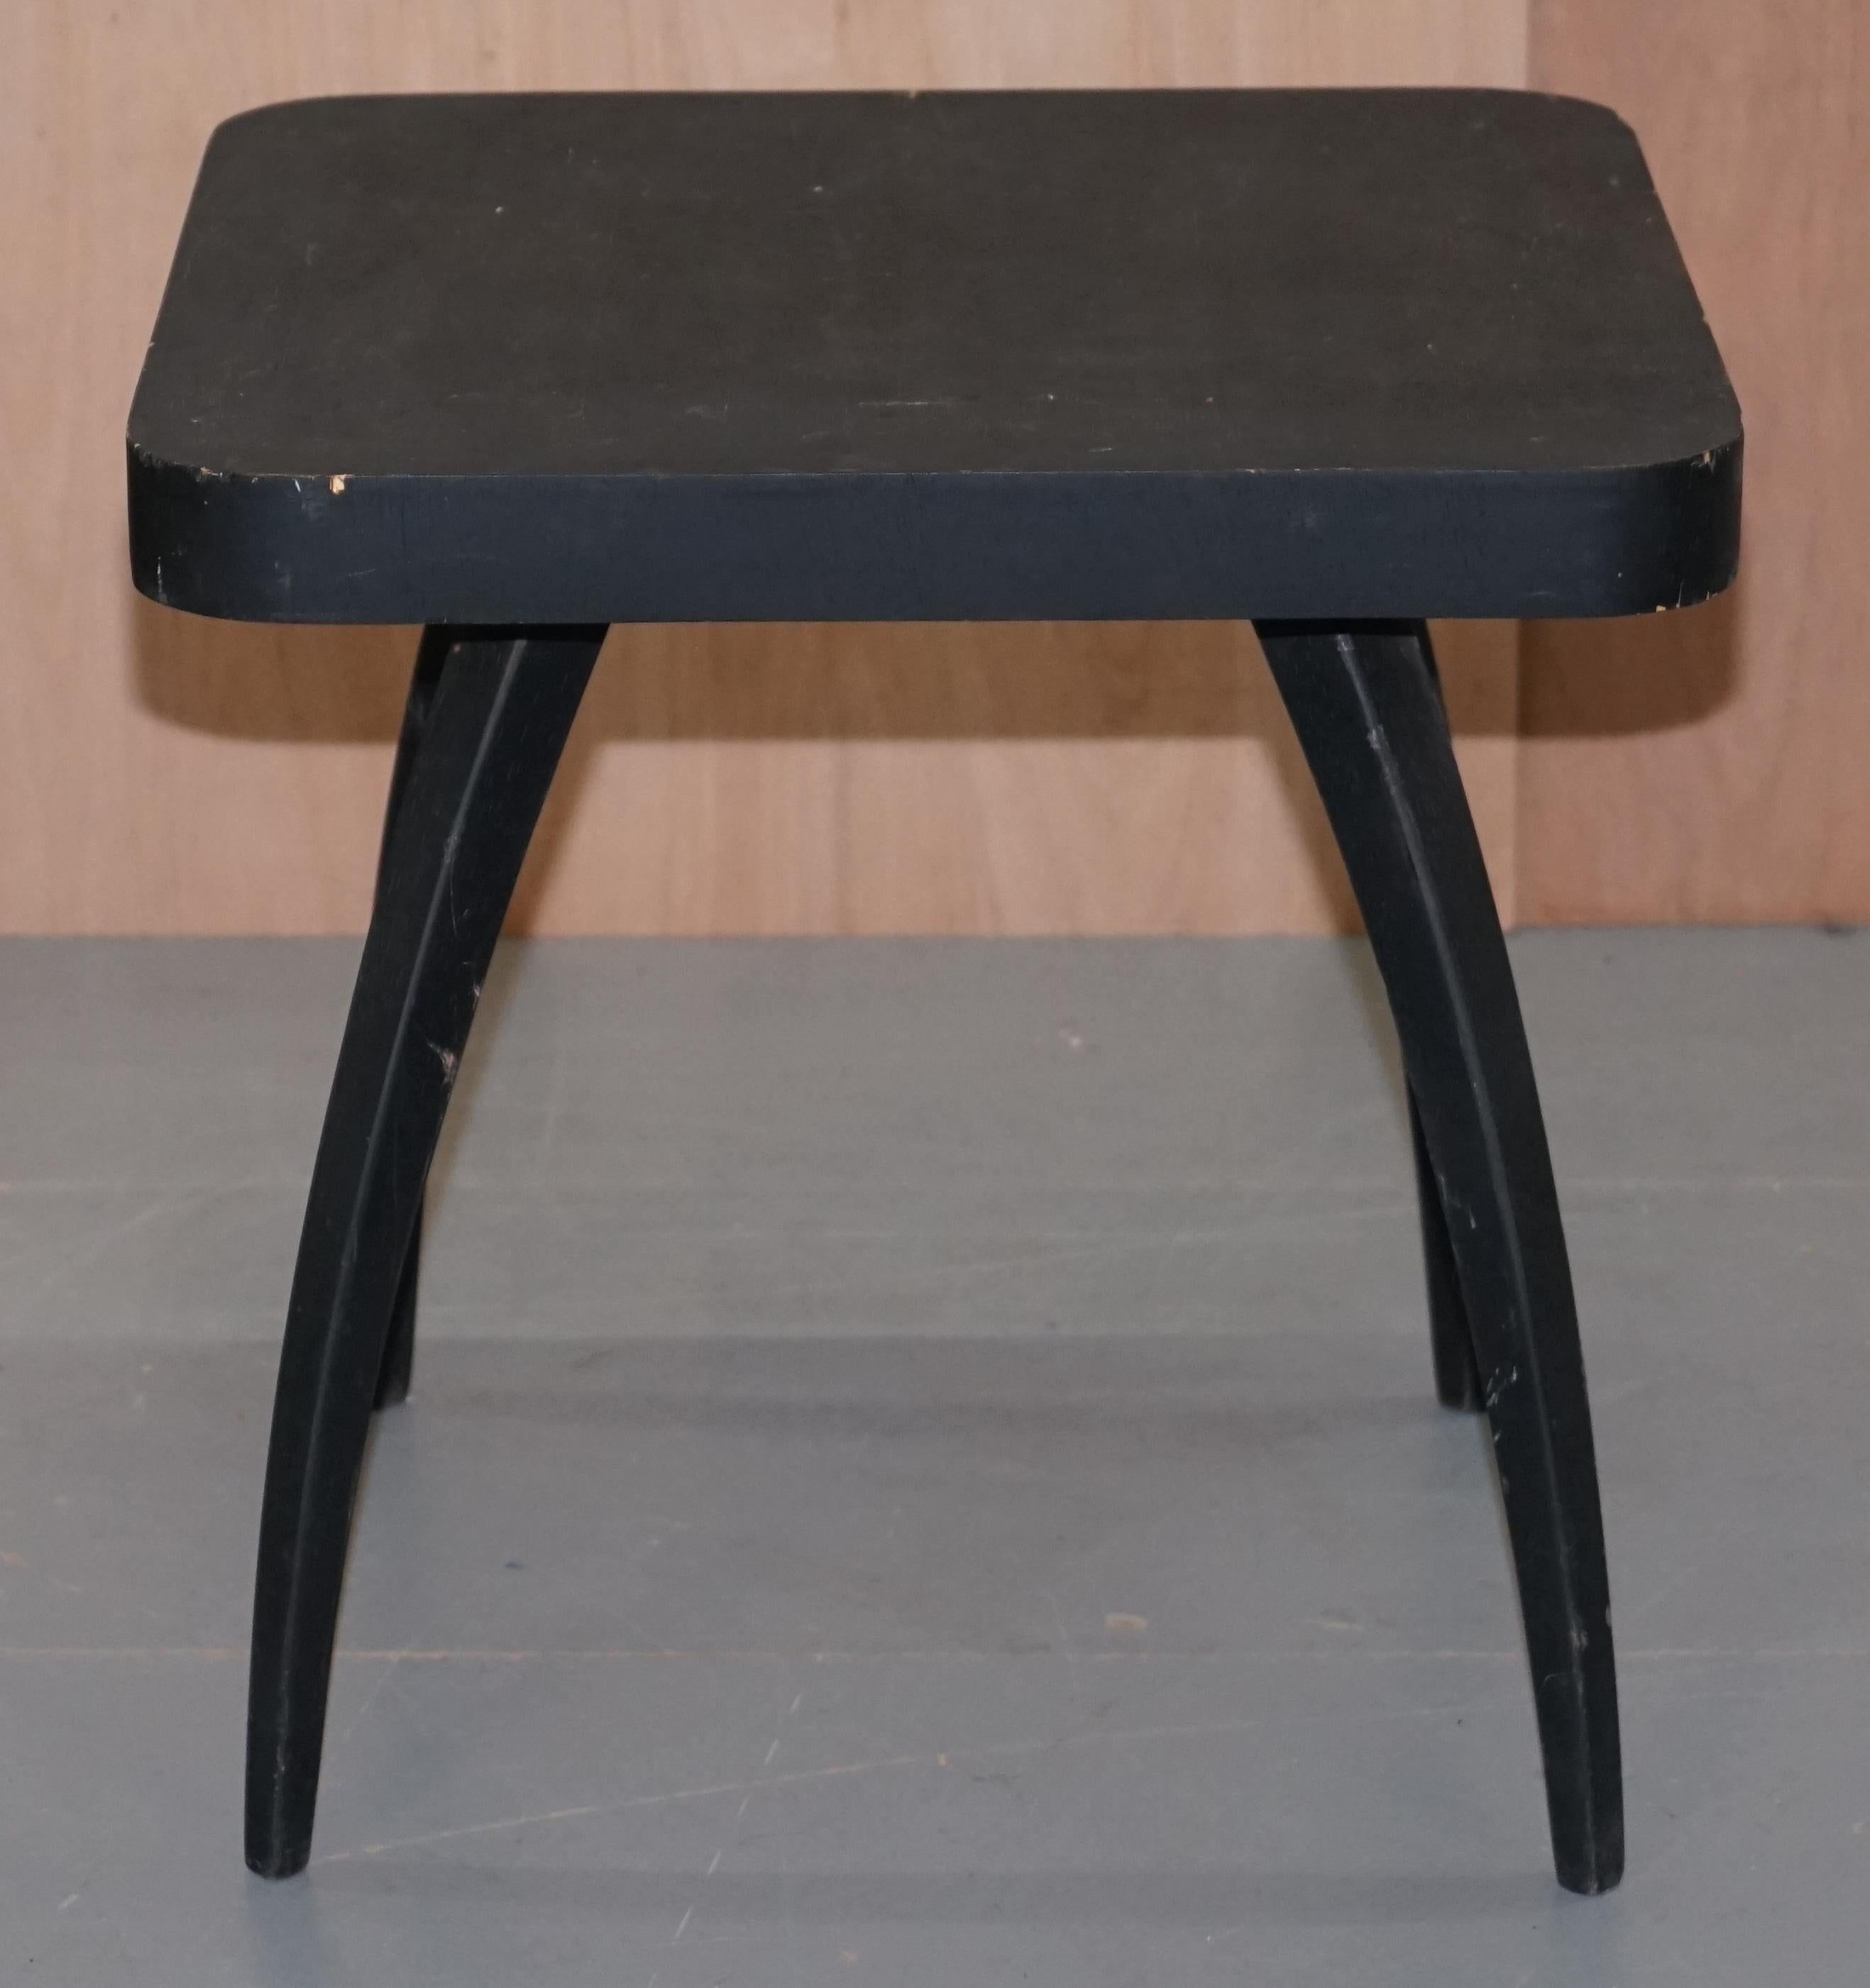 We are delighted to offer for sale this original J Halabala ebonised black spider table circa 1930s

An iconic table and a design classic, this piece looks sublime from every angle.

It has varying patina marks all over, I can have the table